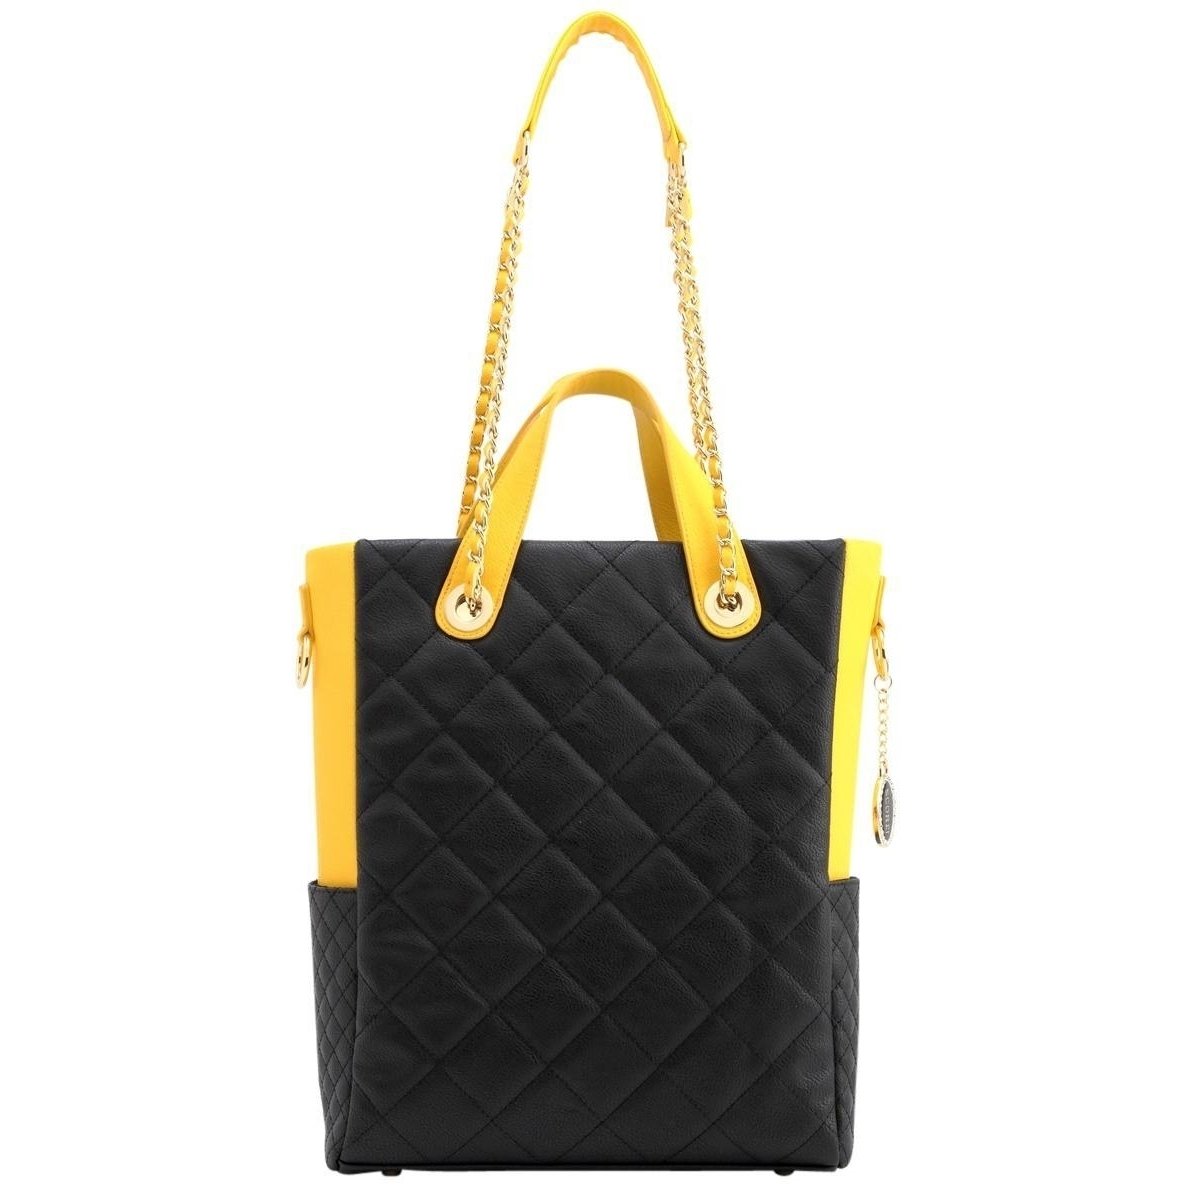 SCORE!'s Kat Travel Tote For Business, Work, Or School Quilted Shoulder Bag - Black And Gold Yellow